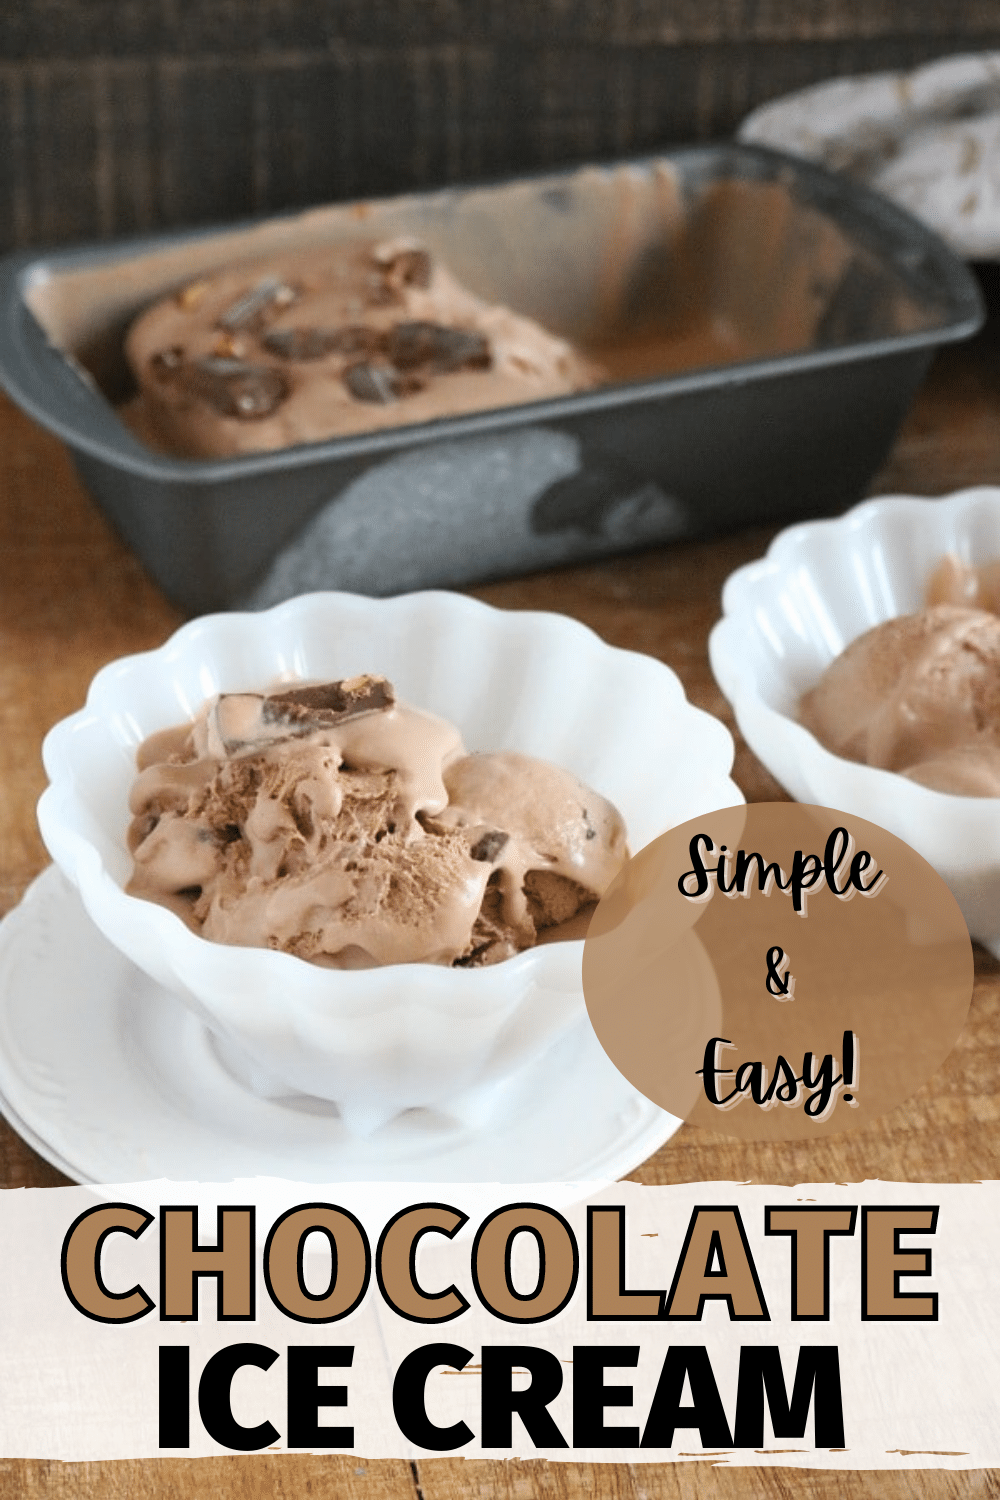 This homemade chocolate ice cream is so easy to make! Just 4 ingredients and a few minutes (before freezing) are all it takes. No ice cream machine needed! #nochurn #icecream #easydessert via @wondermomwannab